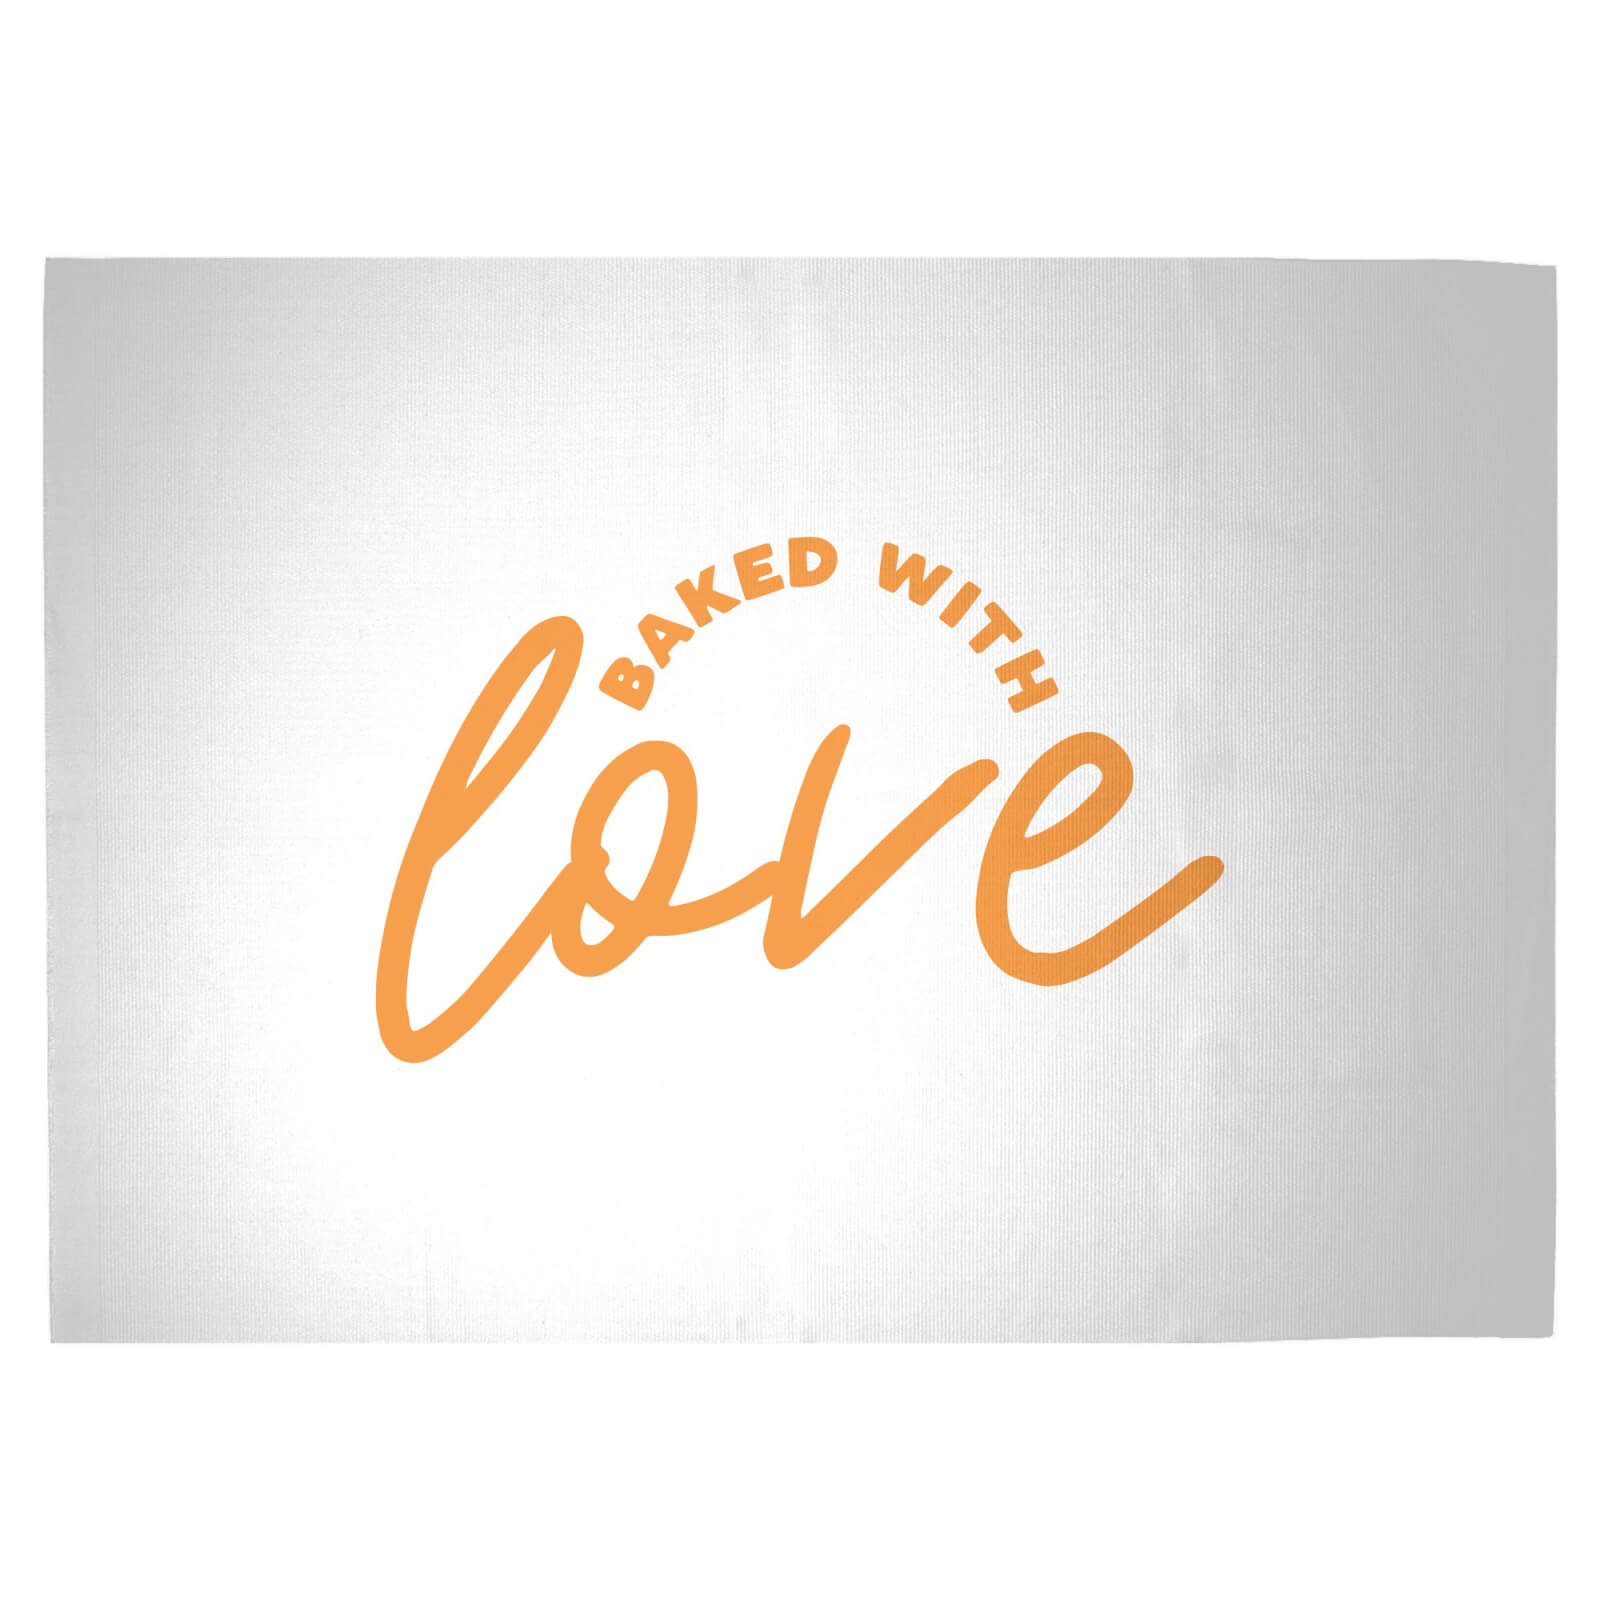 Baked With Love Woven Rug - Large